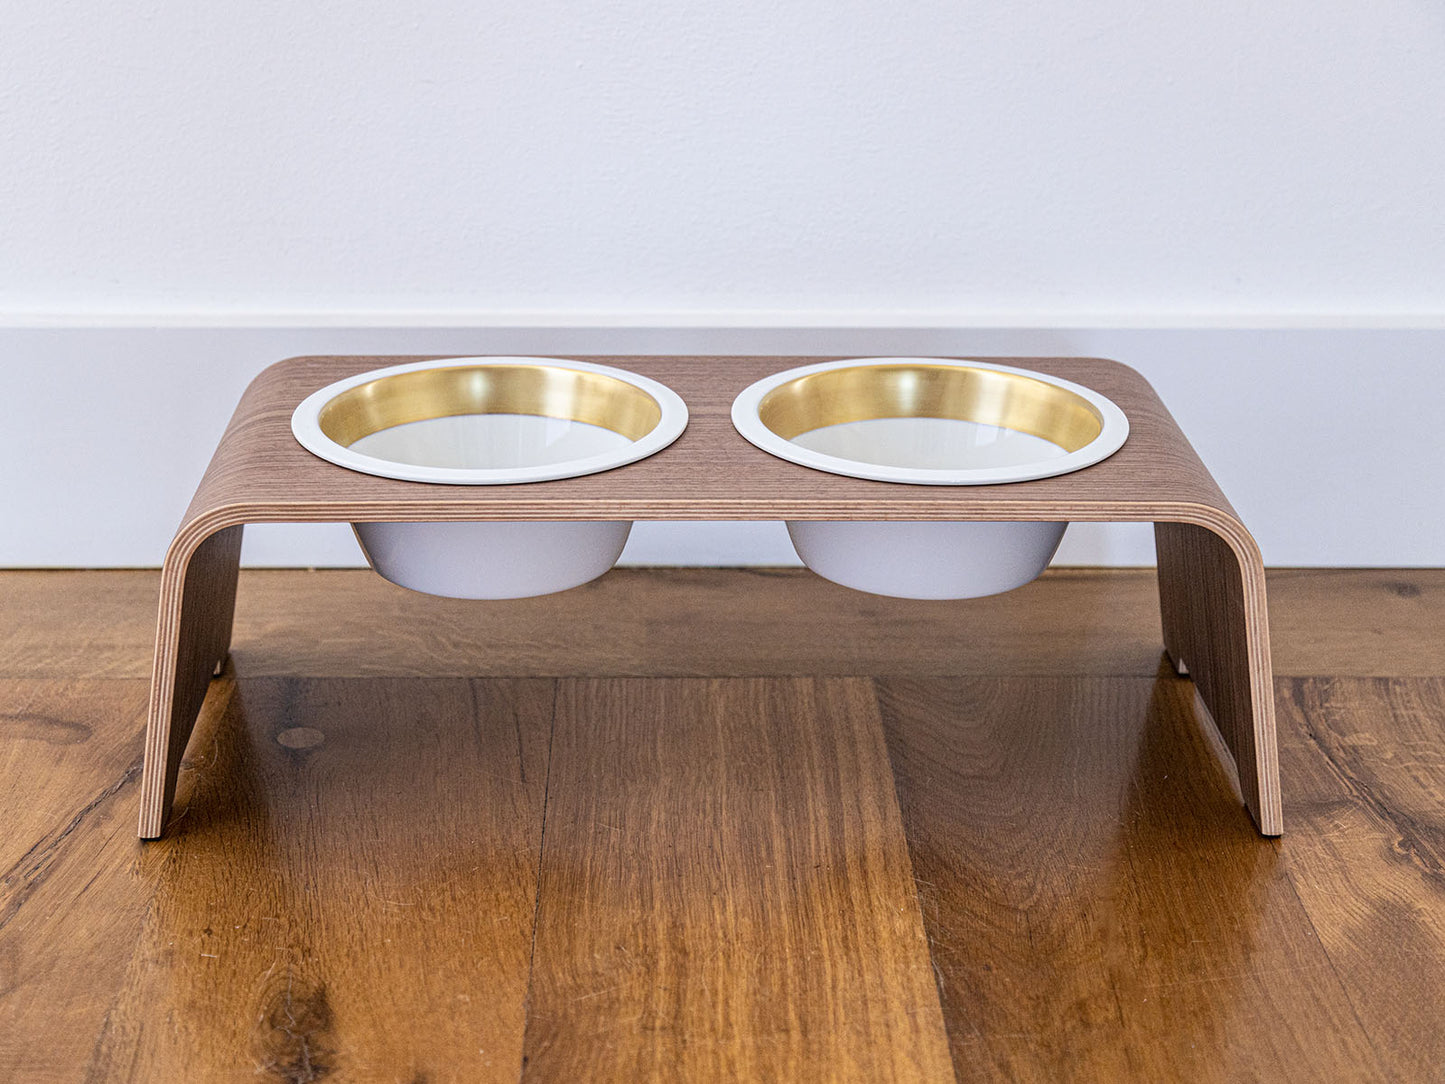 Surcharge GOLD Edition for two porcelain bowls of the dogBar® M or M-small